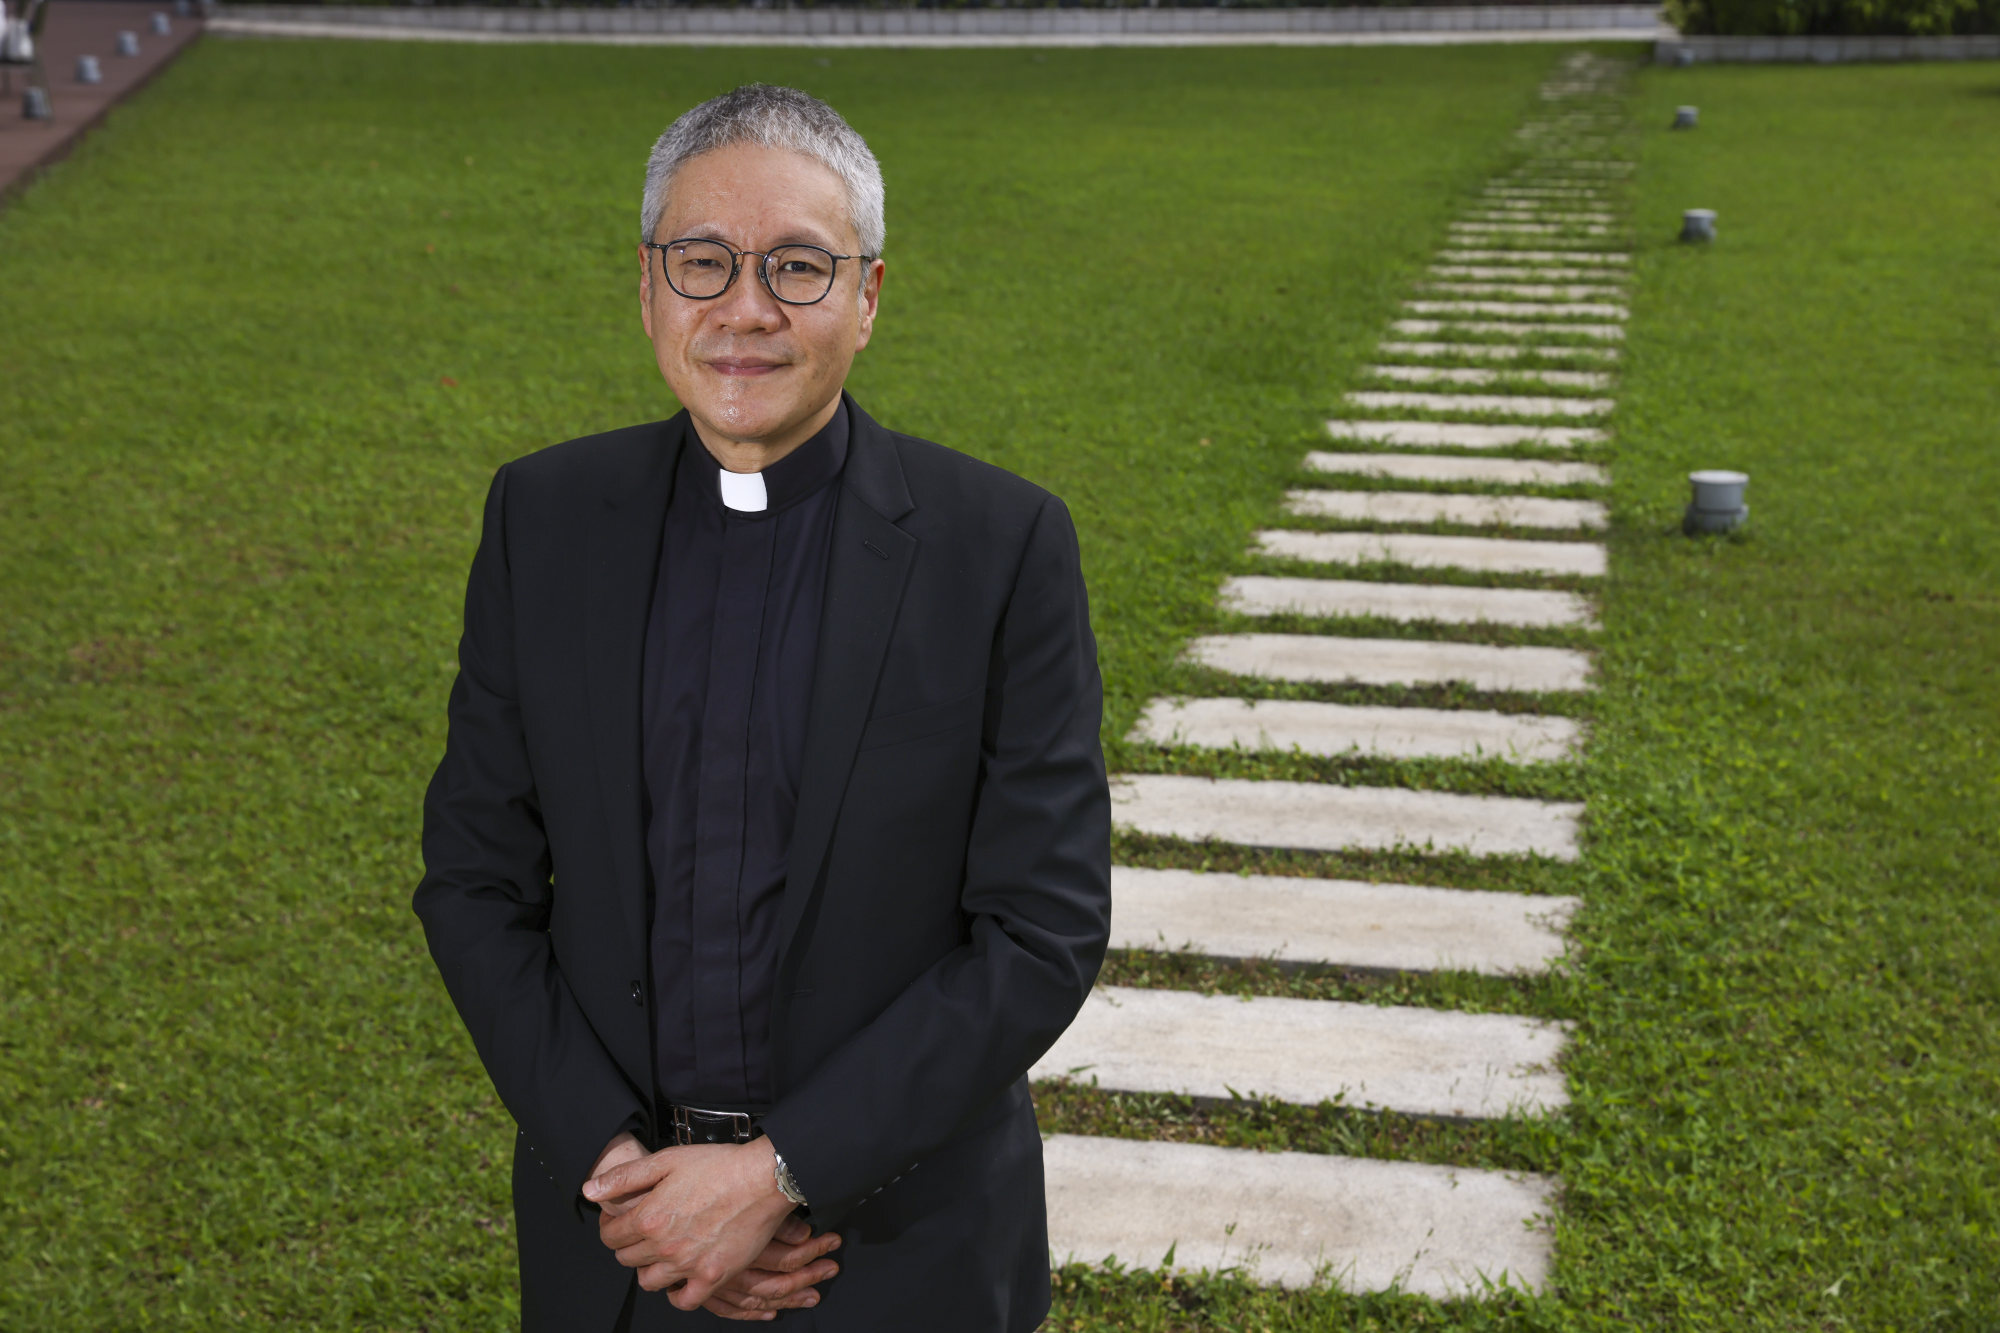 Reverend Canon Peter Koon says he does not believe the government will establish a religious office. Photo: Nora Tam